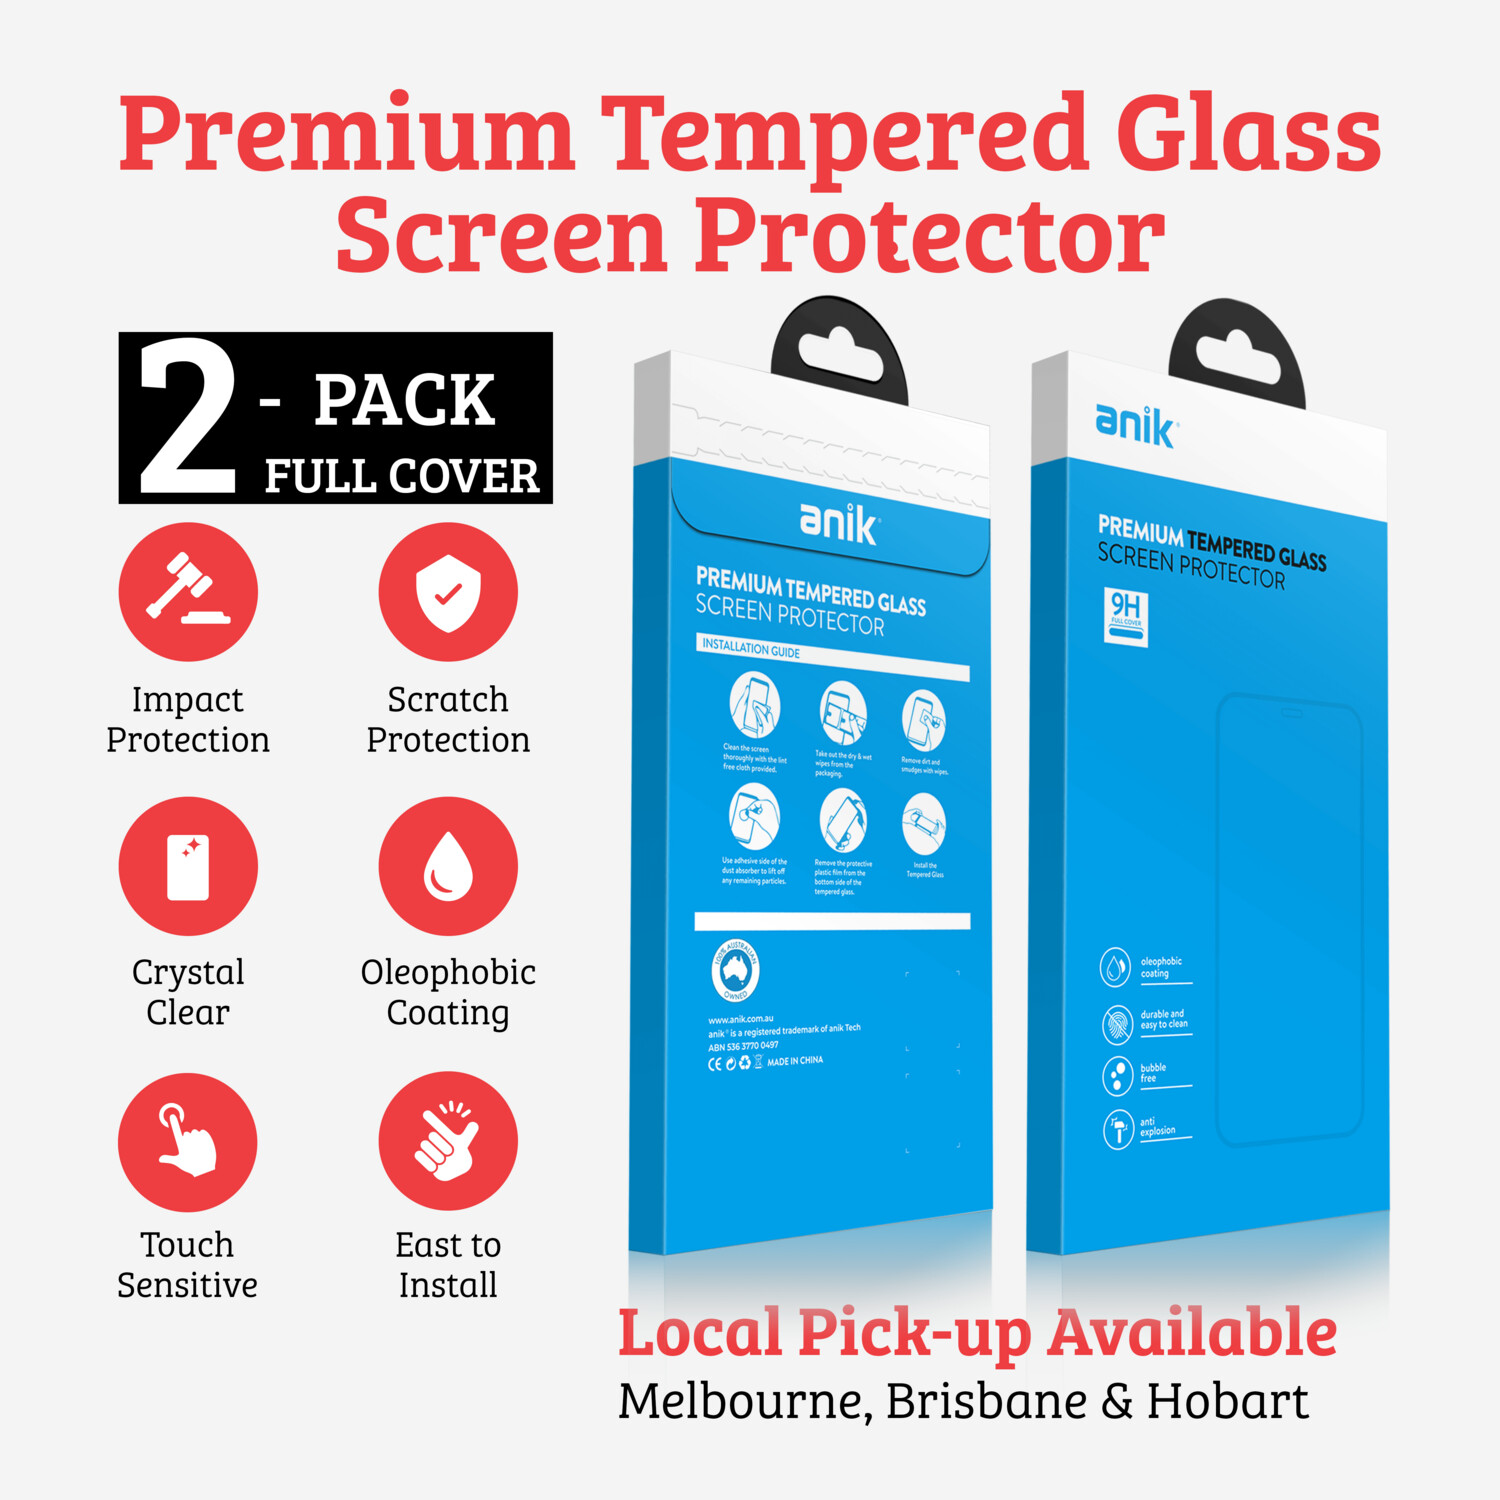 ANIK Premium Full Cover Tempered Glass Screen Protector for Samsung Galaxy Note 20 [2 Pack]